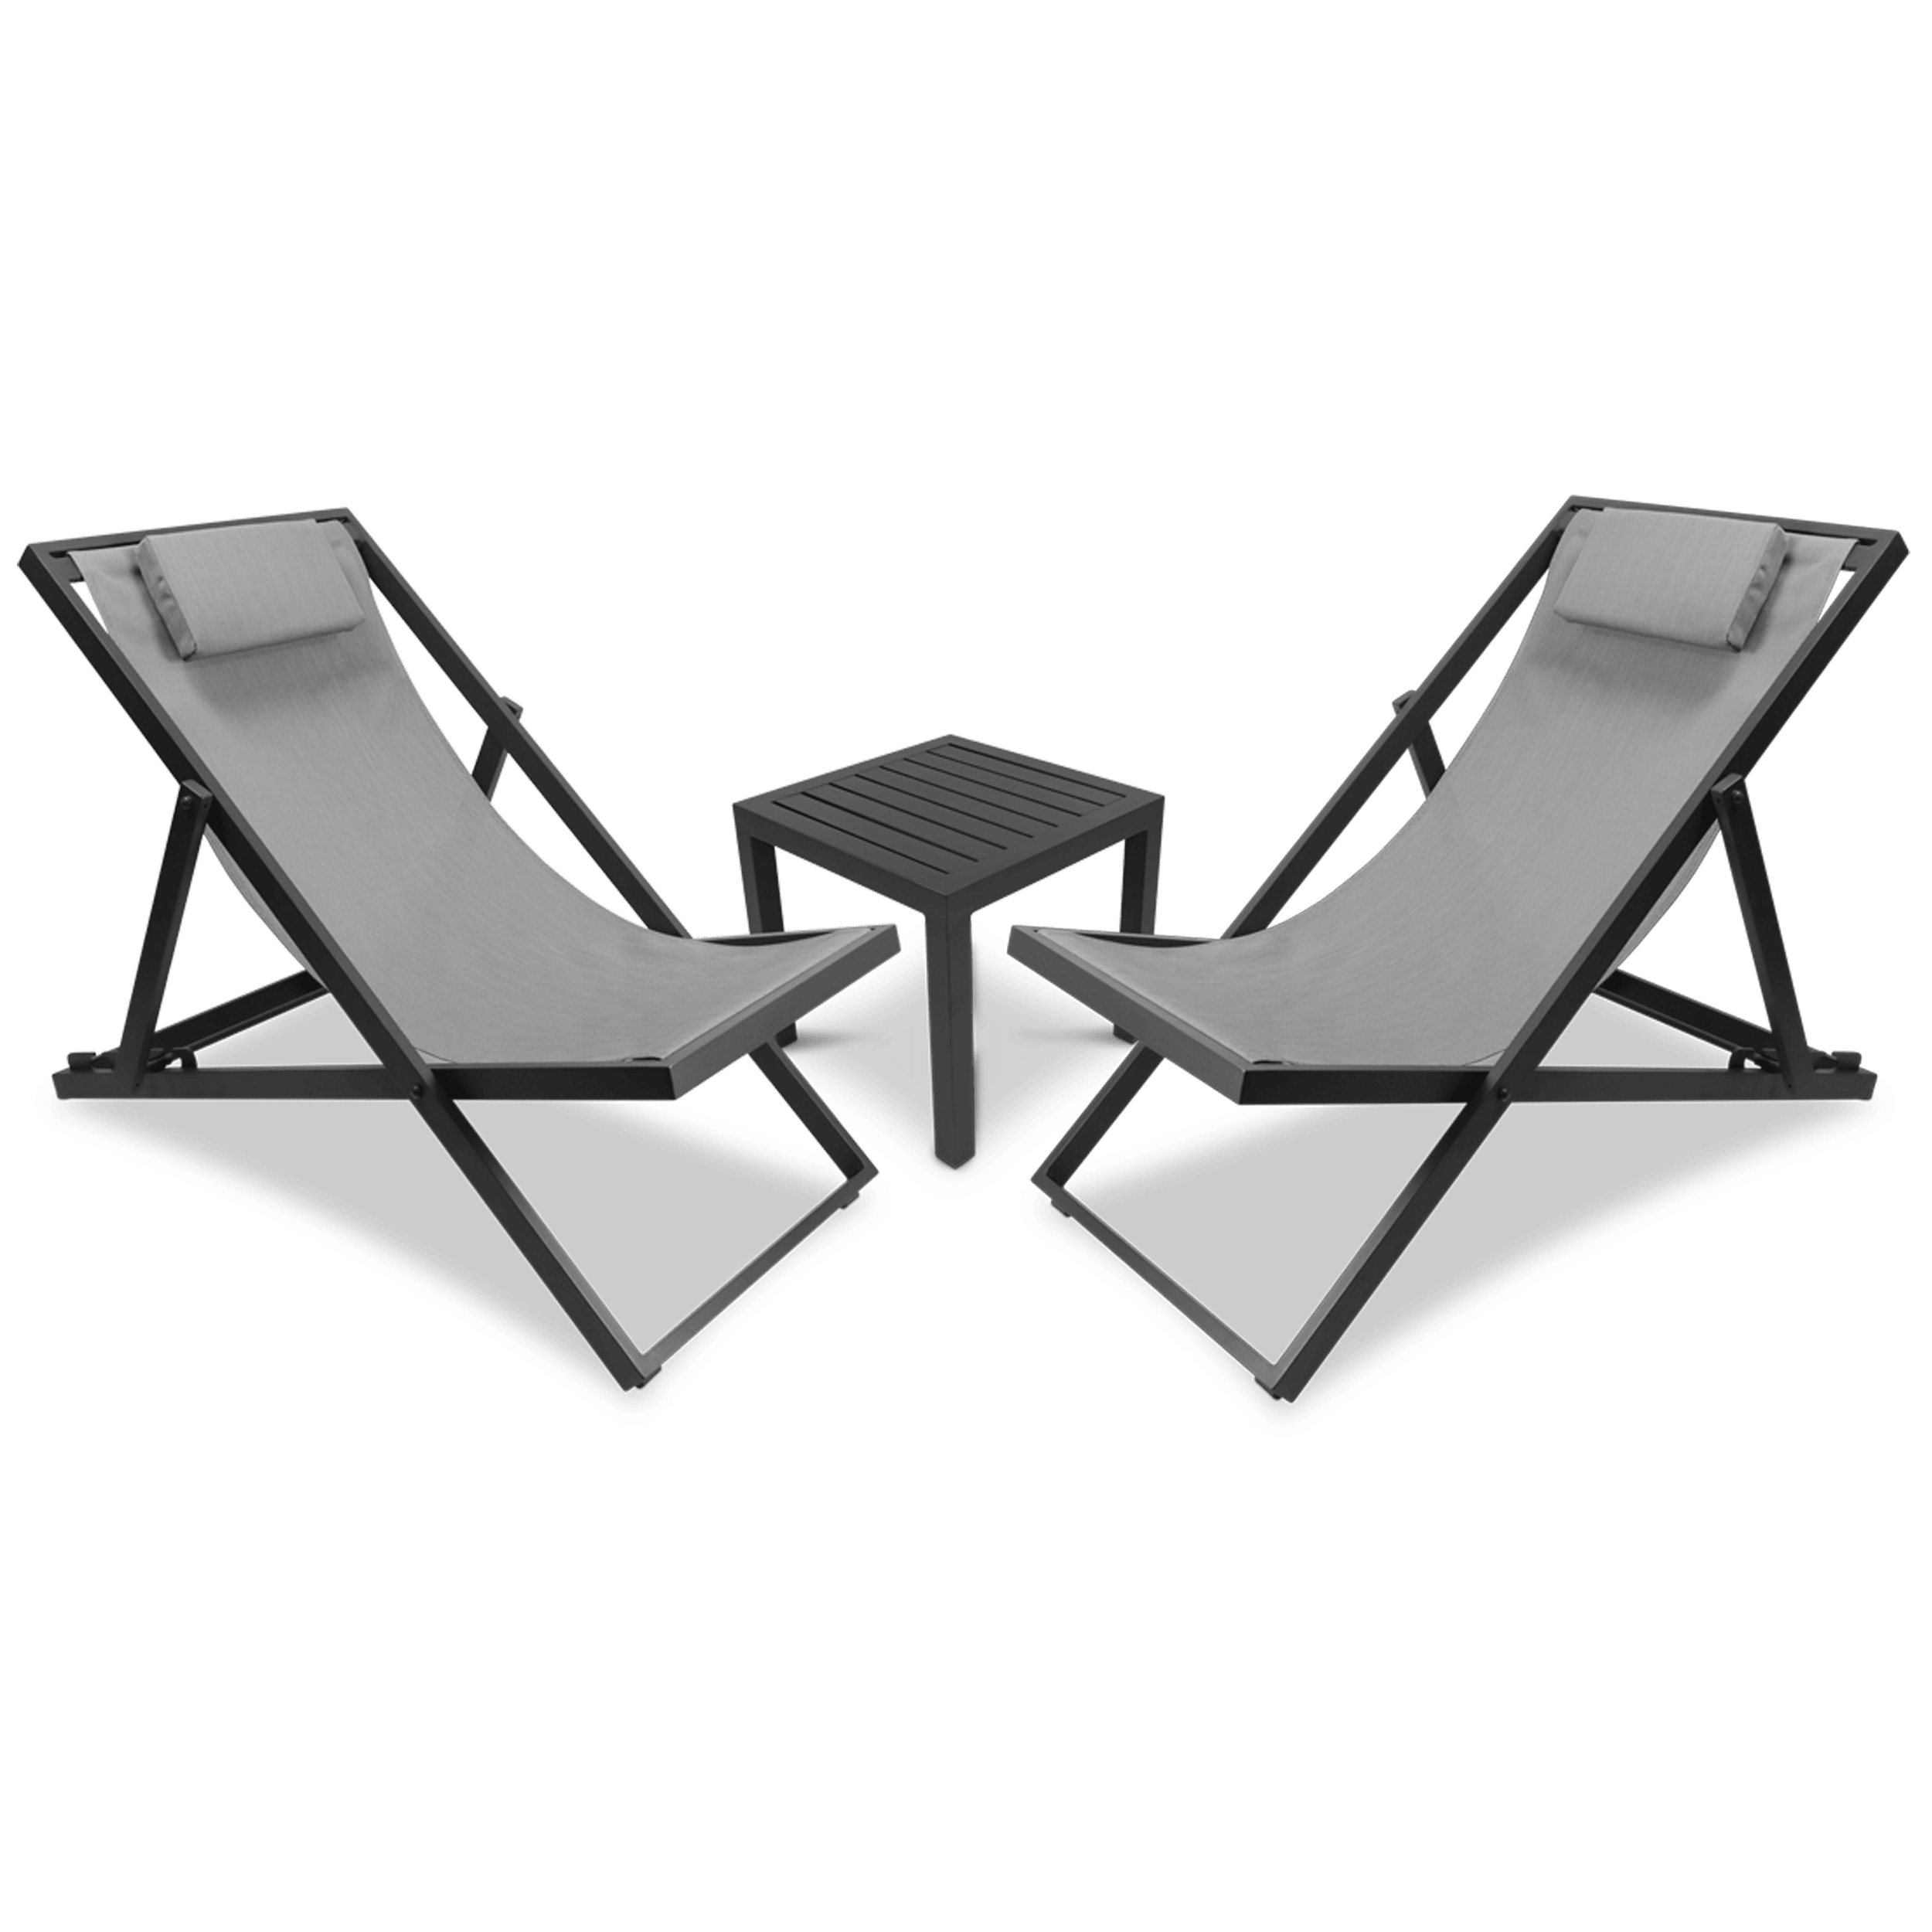 Chill Deck Chair and San Sebastian 3pc Occasional Set in Gunmetal and Charcoal Grey Textilene